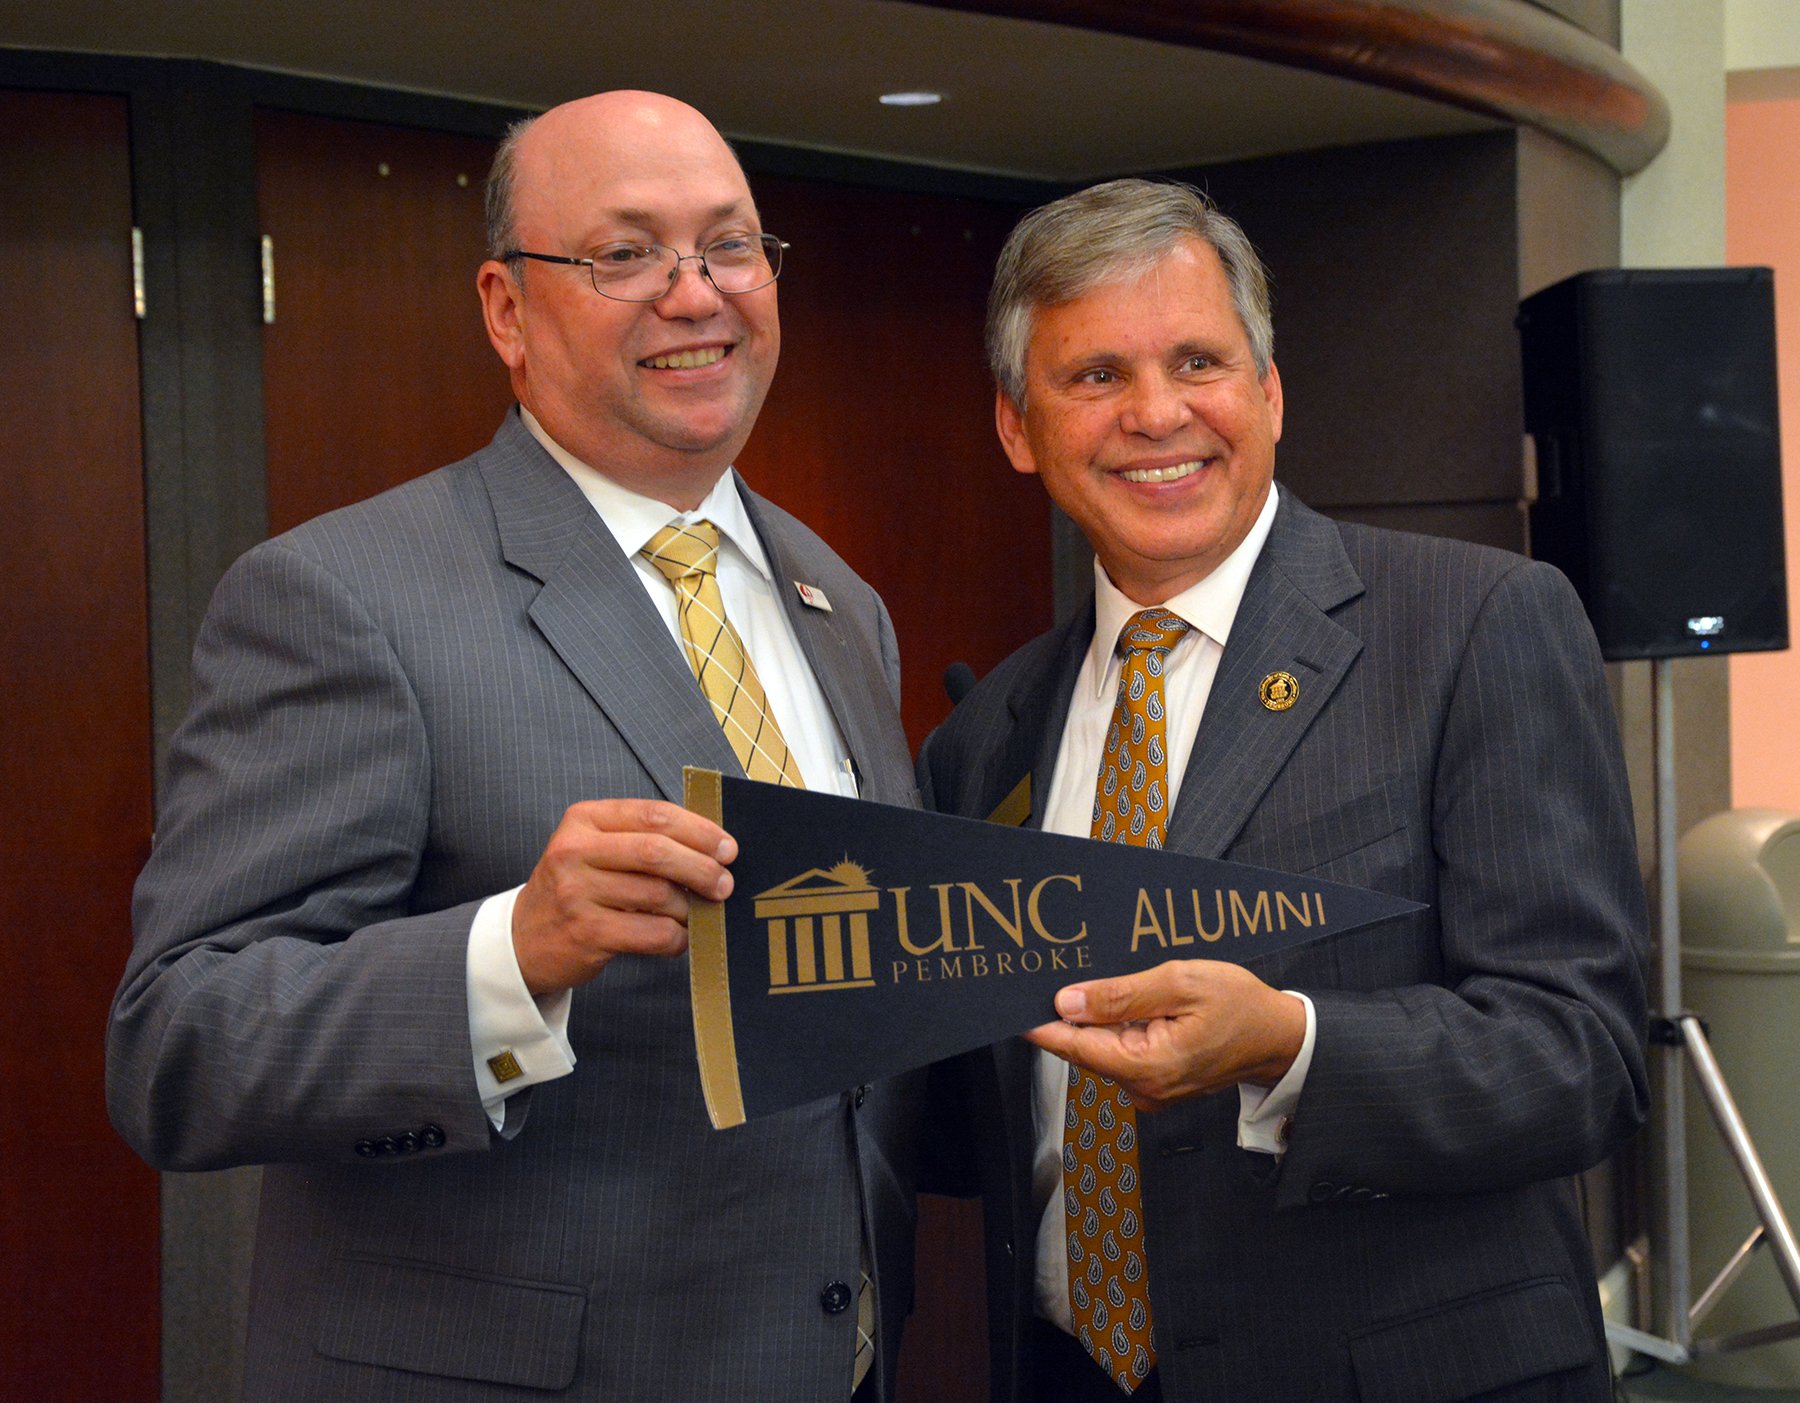 Pictured are Dr. Dale McInnis, president of Richmond Community College, and University of North Carolina at Pembroke Chancellor Robin Gary Cummings during a drop-in for Cummings when he was installed as the new chancellor. RichmondCC and UNCP have created a new teacher education program for a Bachelor of Science in Elementary Education